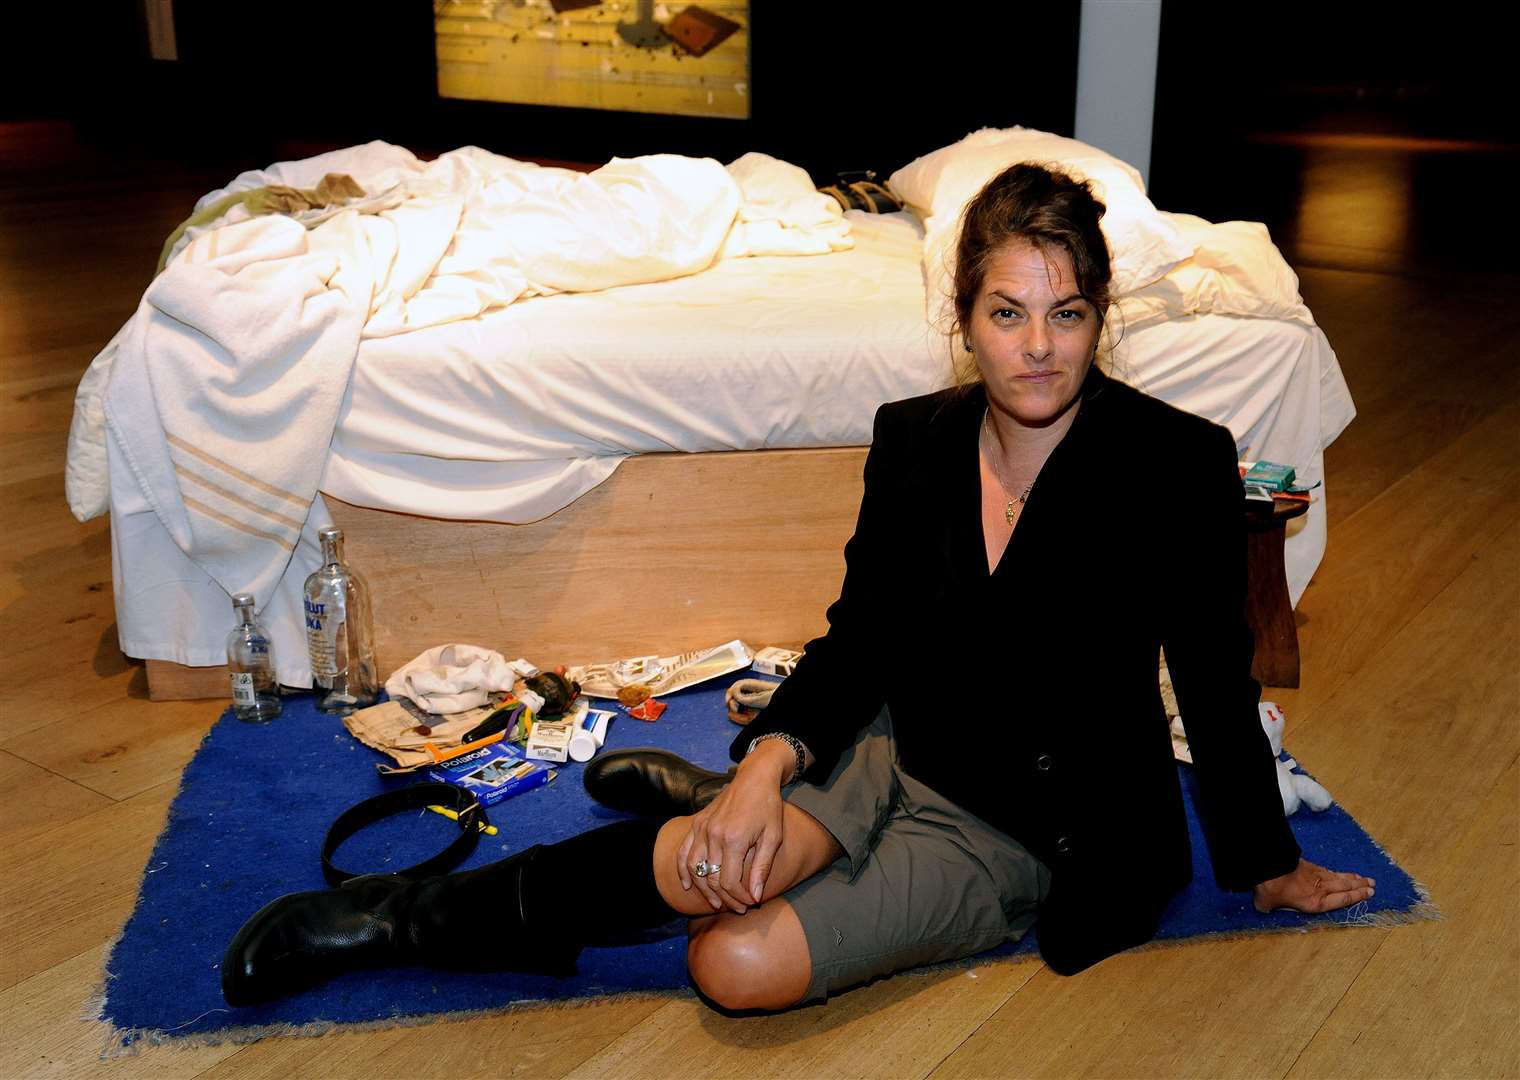 Emin is known for works such as My Bed (Nick Ansell/PA)